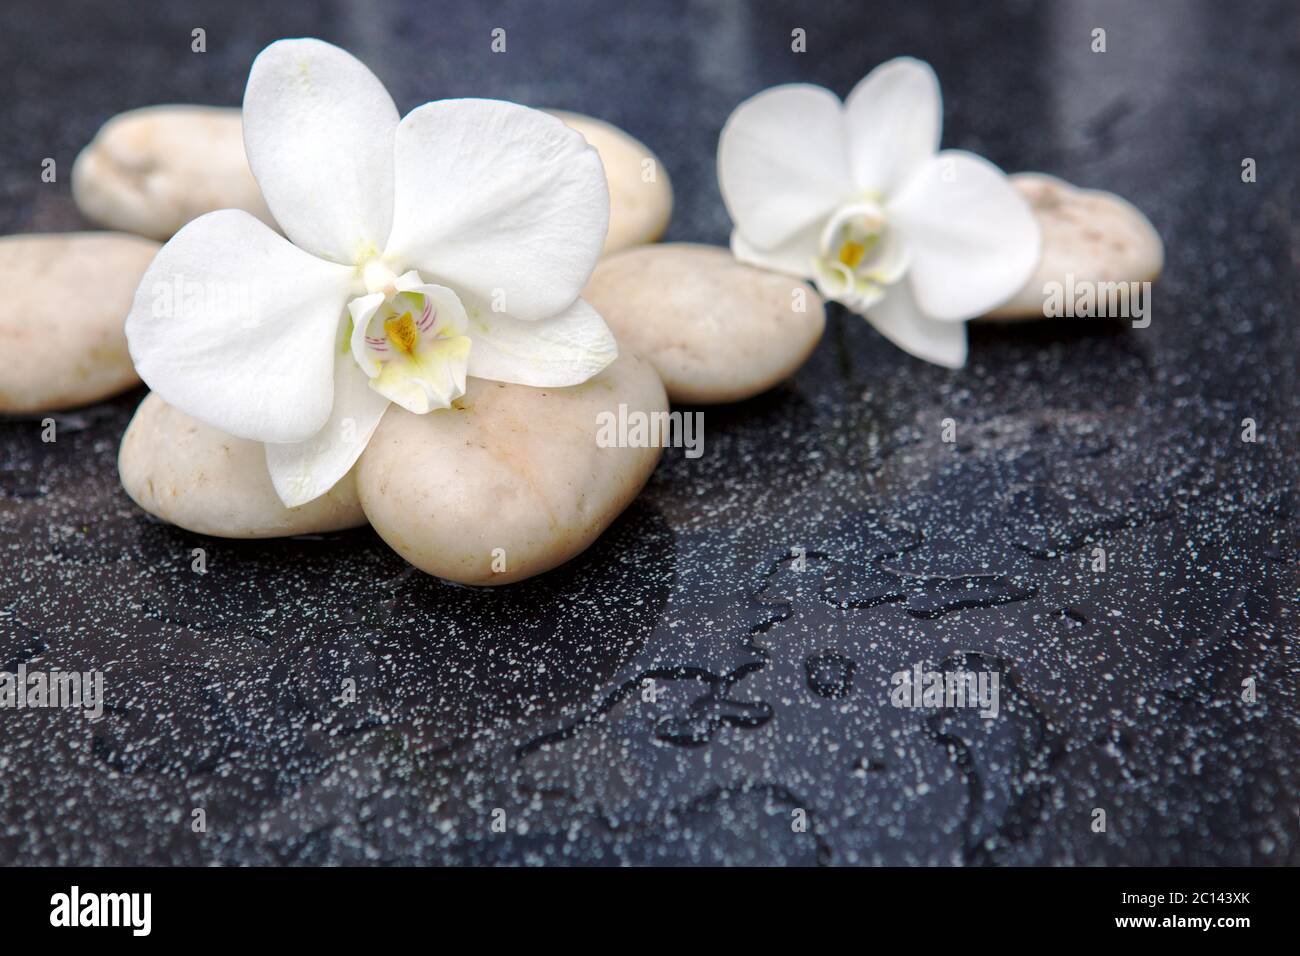 Two orchid flowers and white stones. Stock Photo